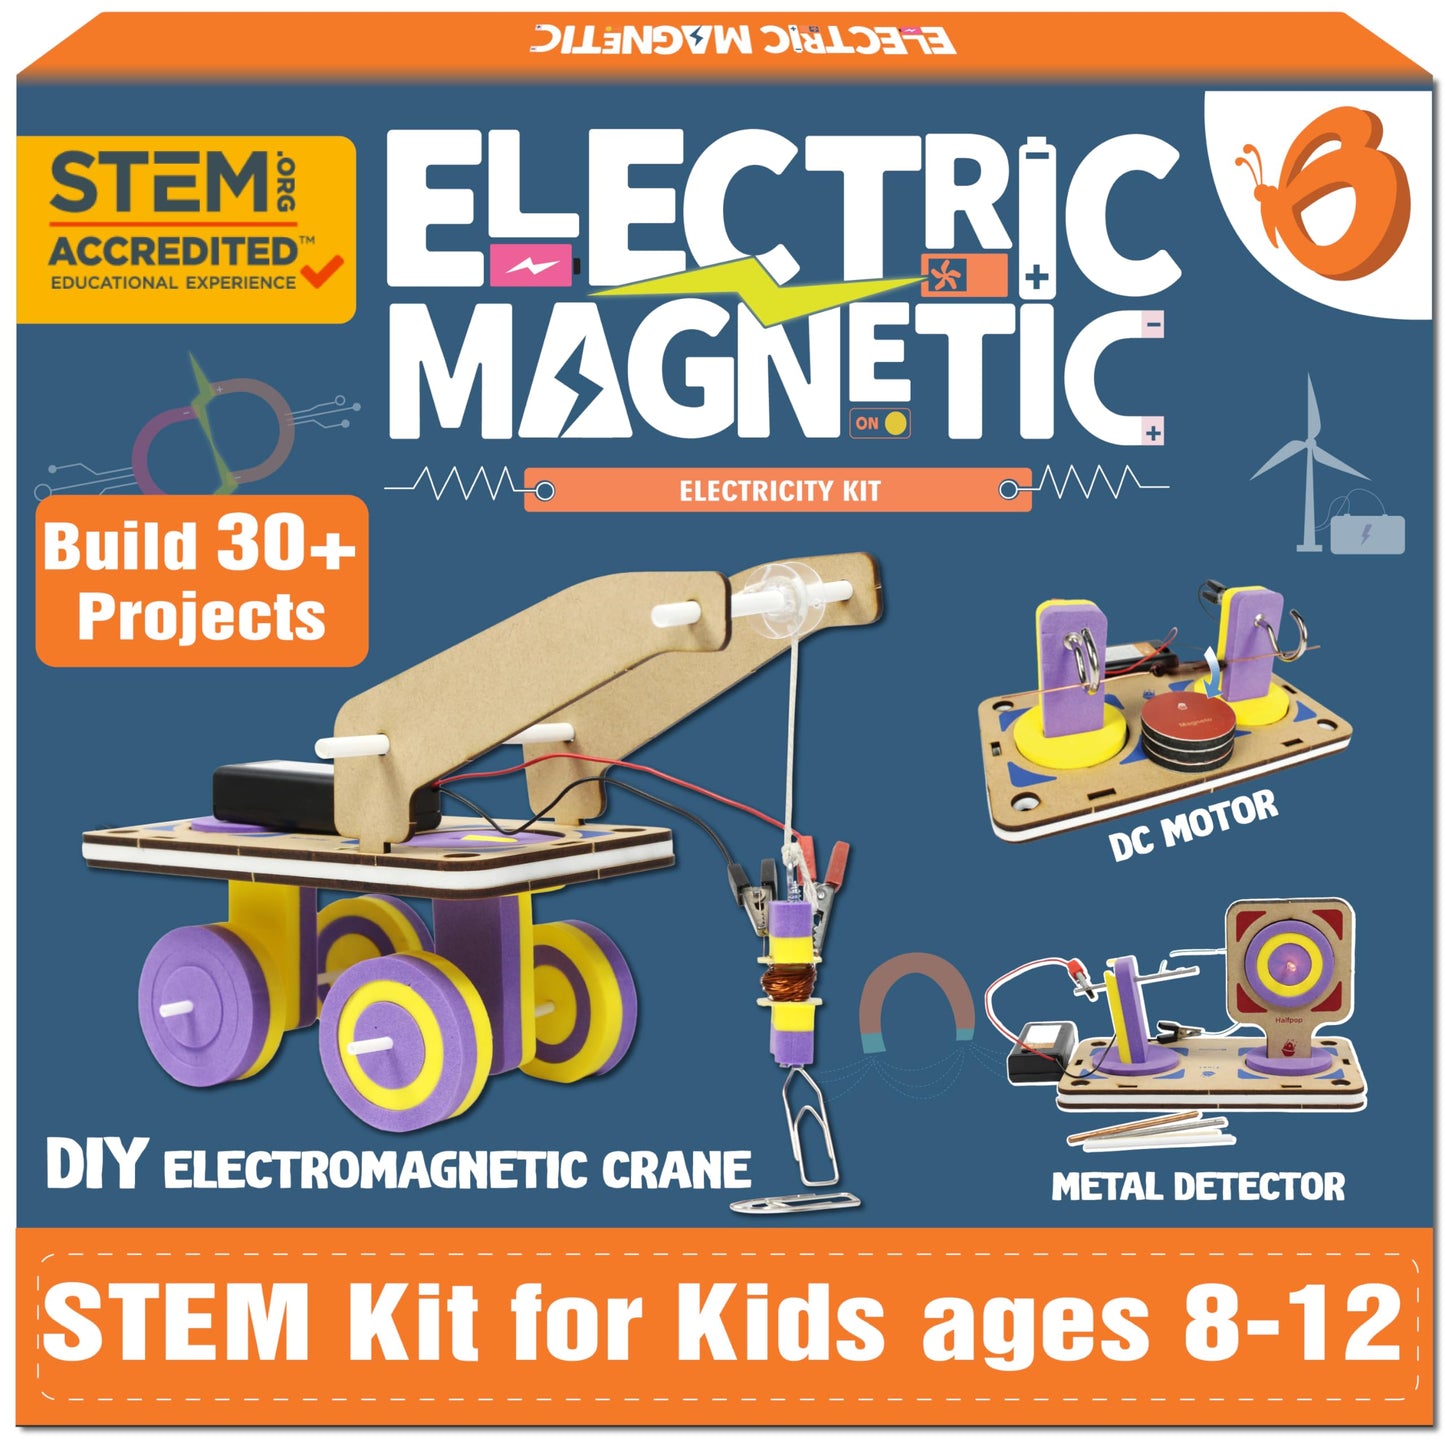 ButterflyEdufields 30in1 STEM Kits for Kids Age 8-10-14 | Electricity & Magnetism | Science Project Kit for Boys & Girls Aged 8-10-12-14 | Electric Circuits, Birthday Gift | Educational Learning Kits